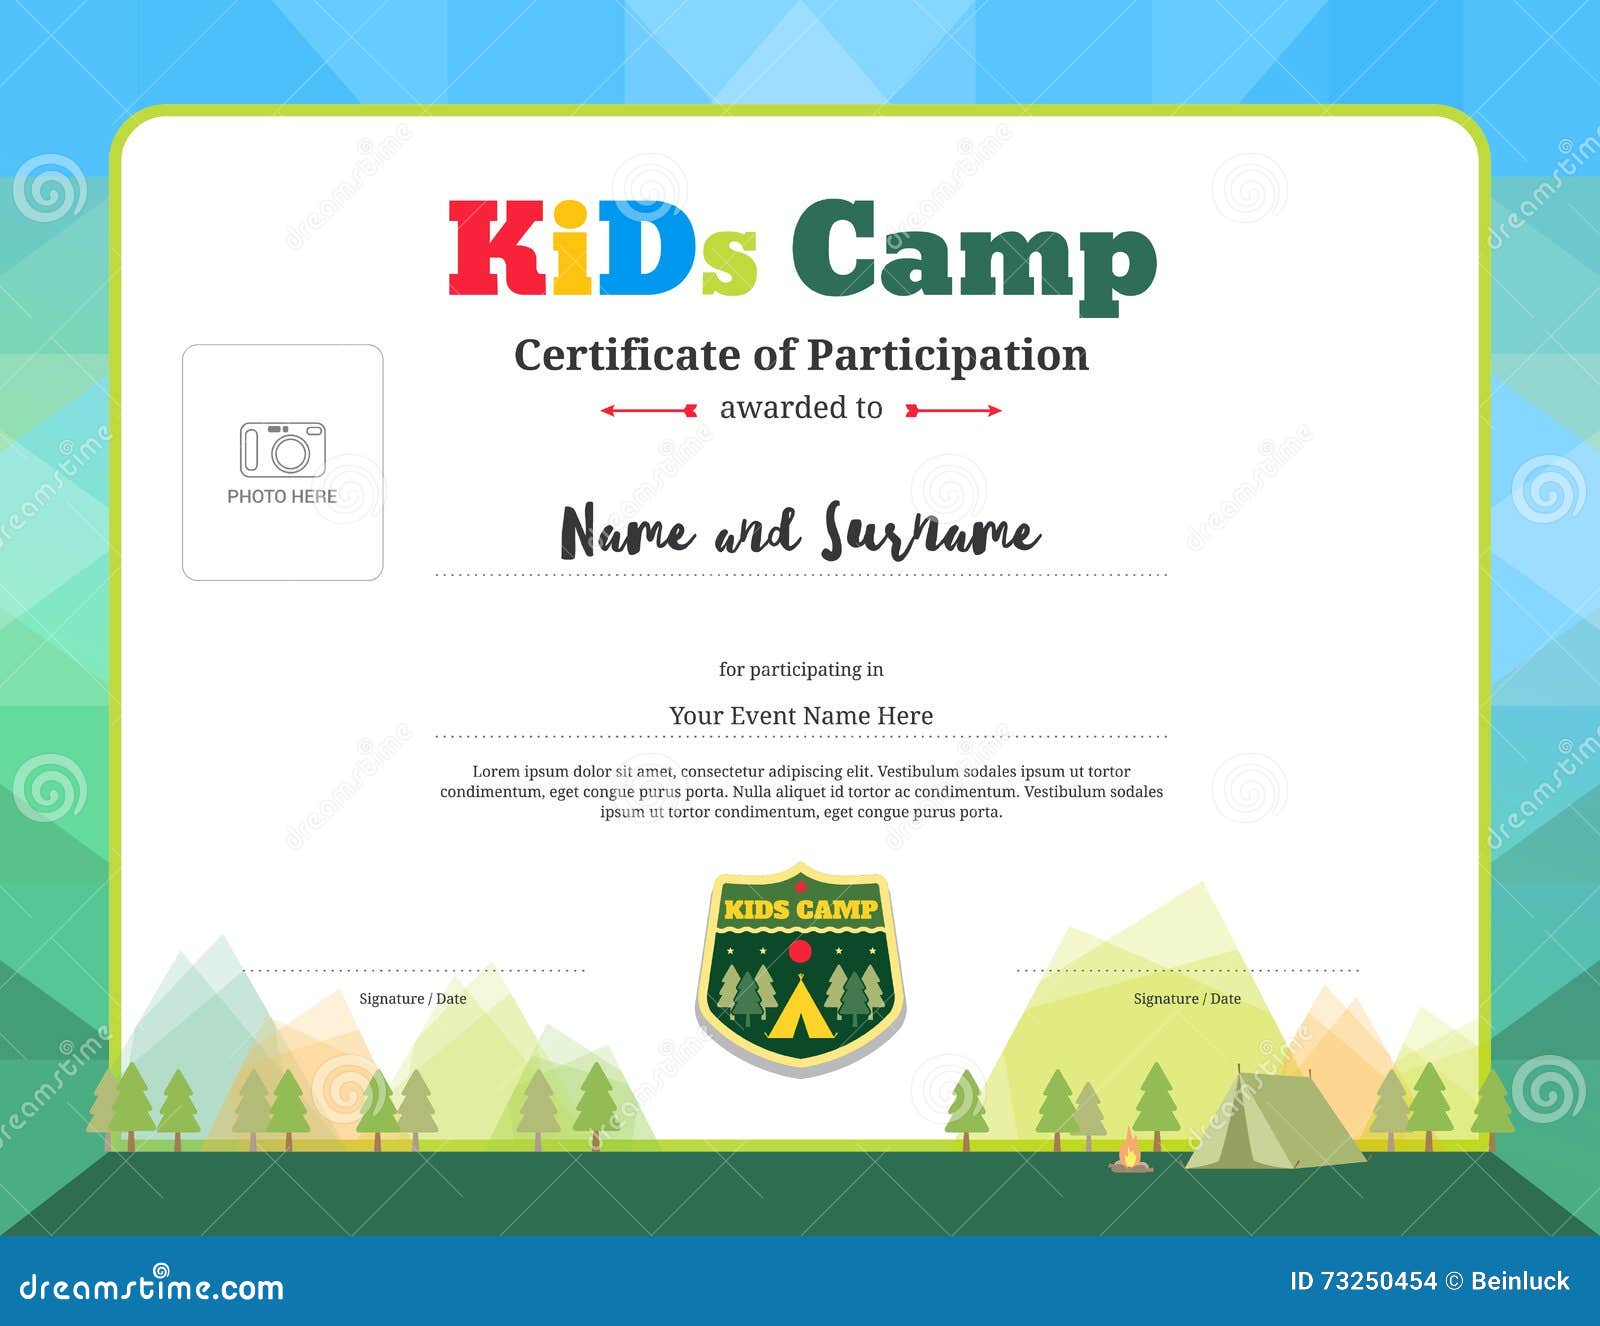 colorful and modern certificate of participation for kids activities